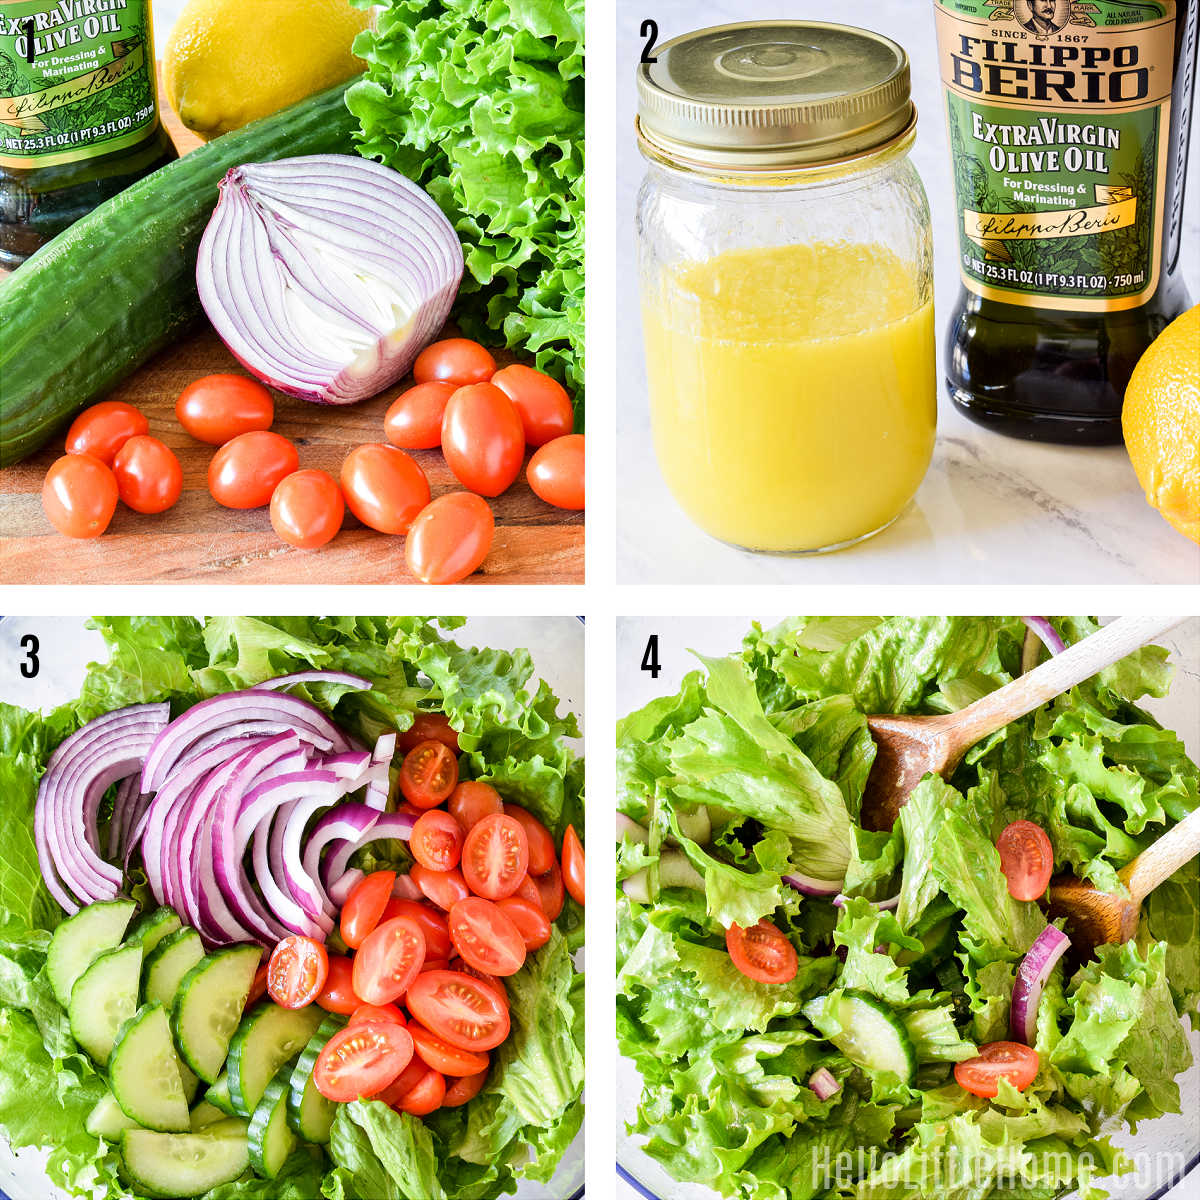 A photo collage showing how to make a garden salad step-by-step.